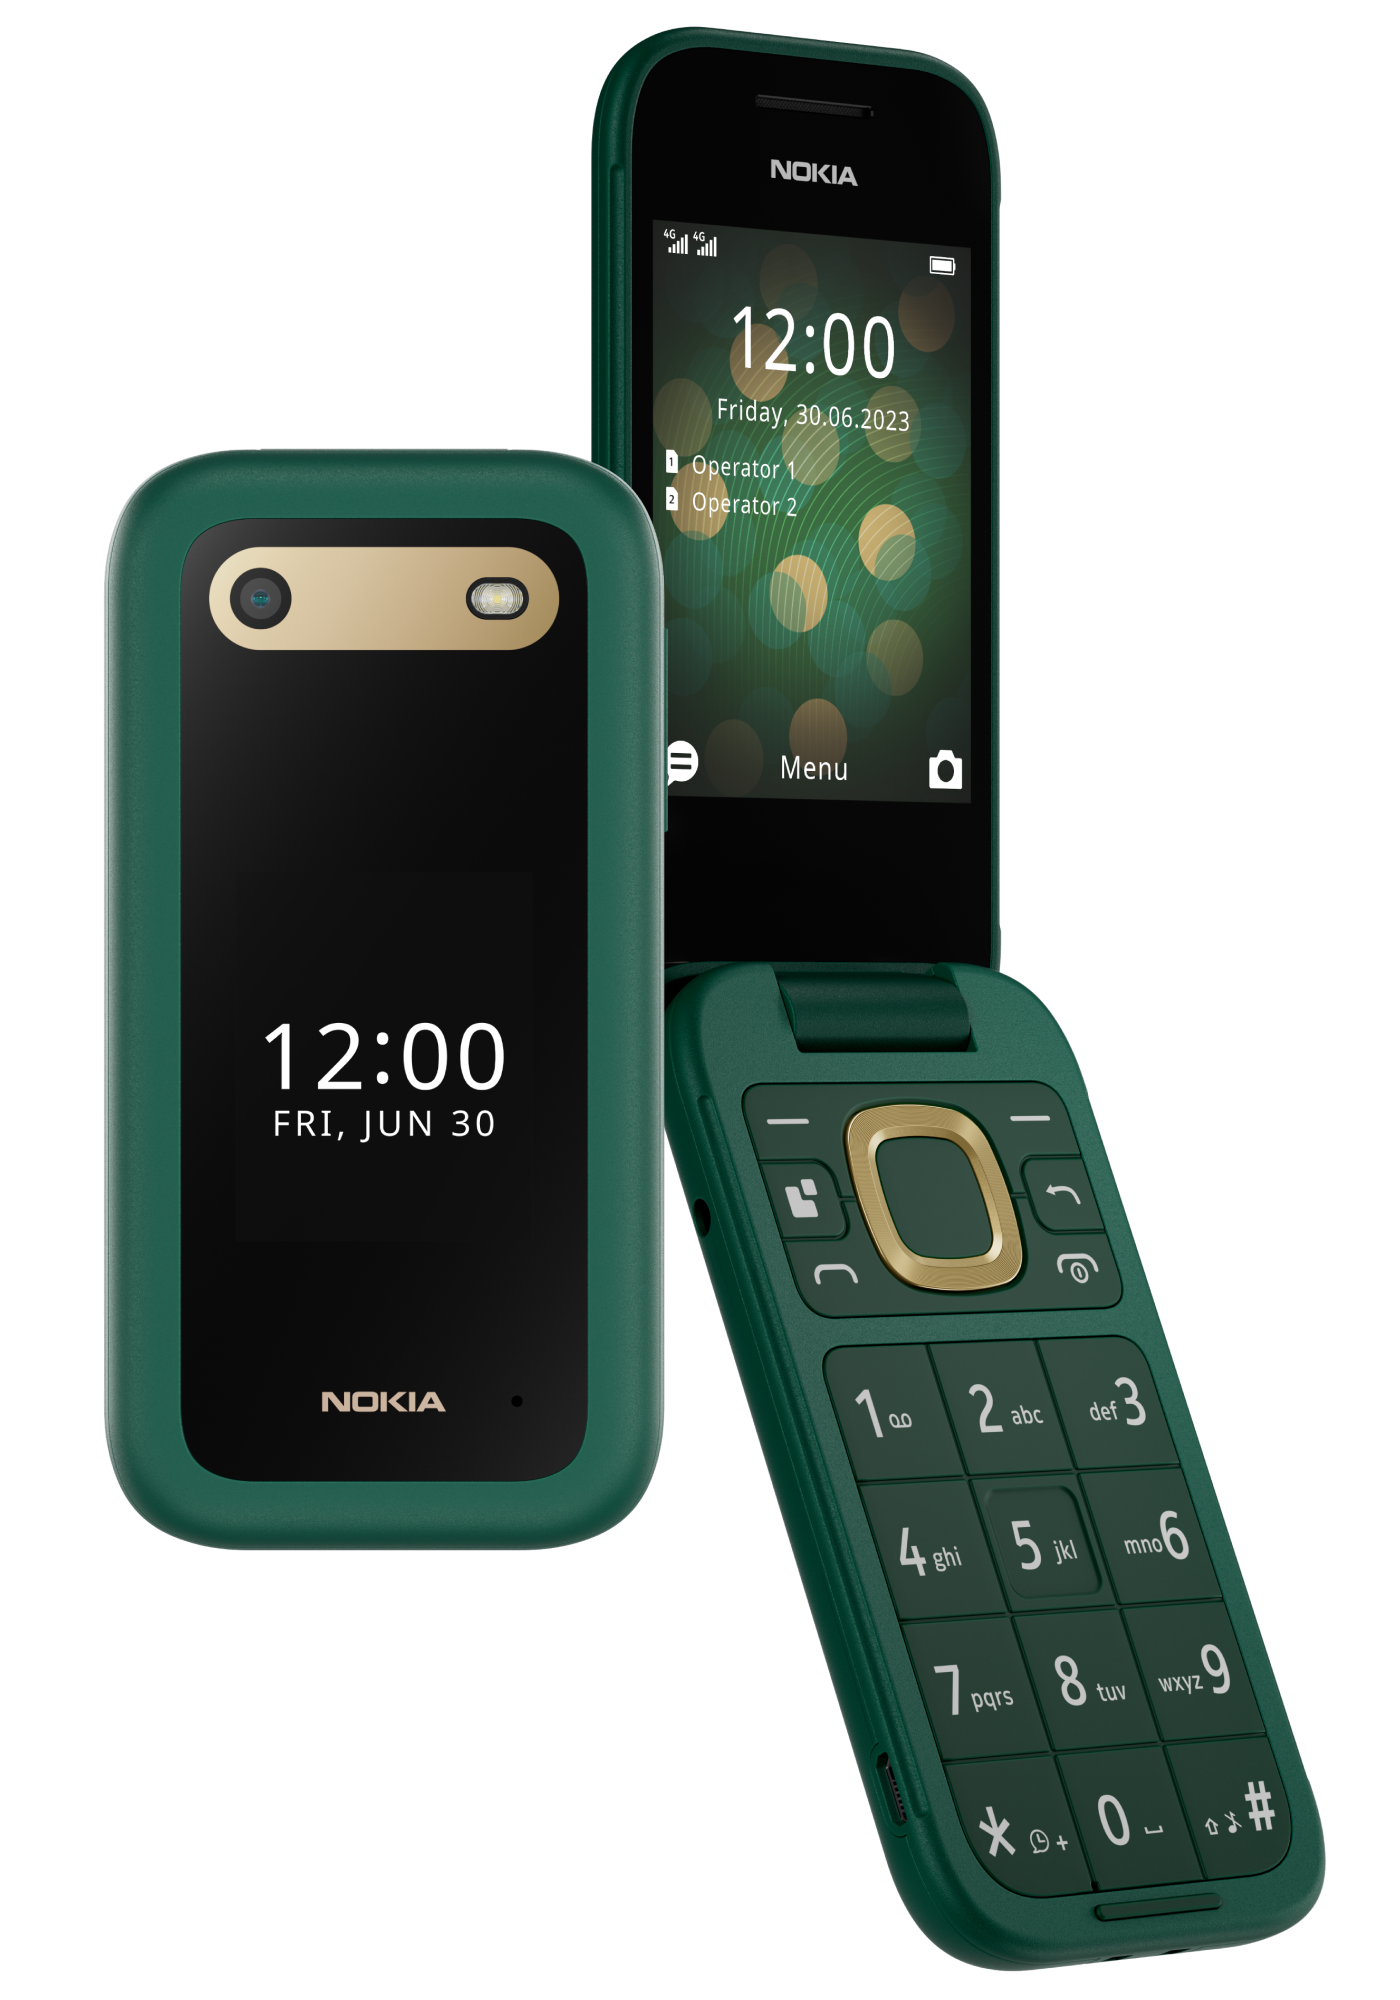 Nokia 2660 gets UPI Scan & Pay Feature, including the existing users